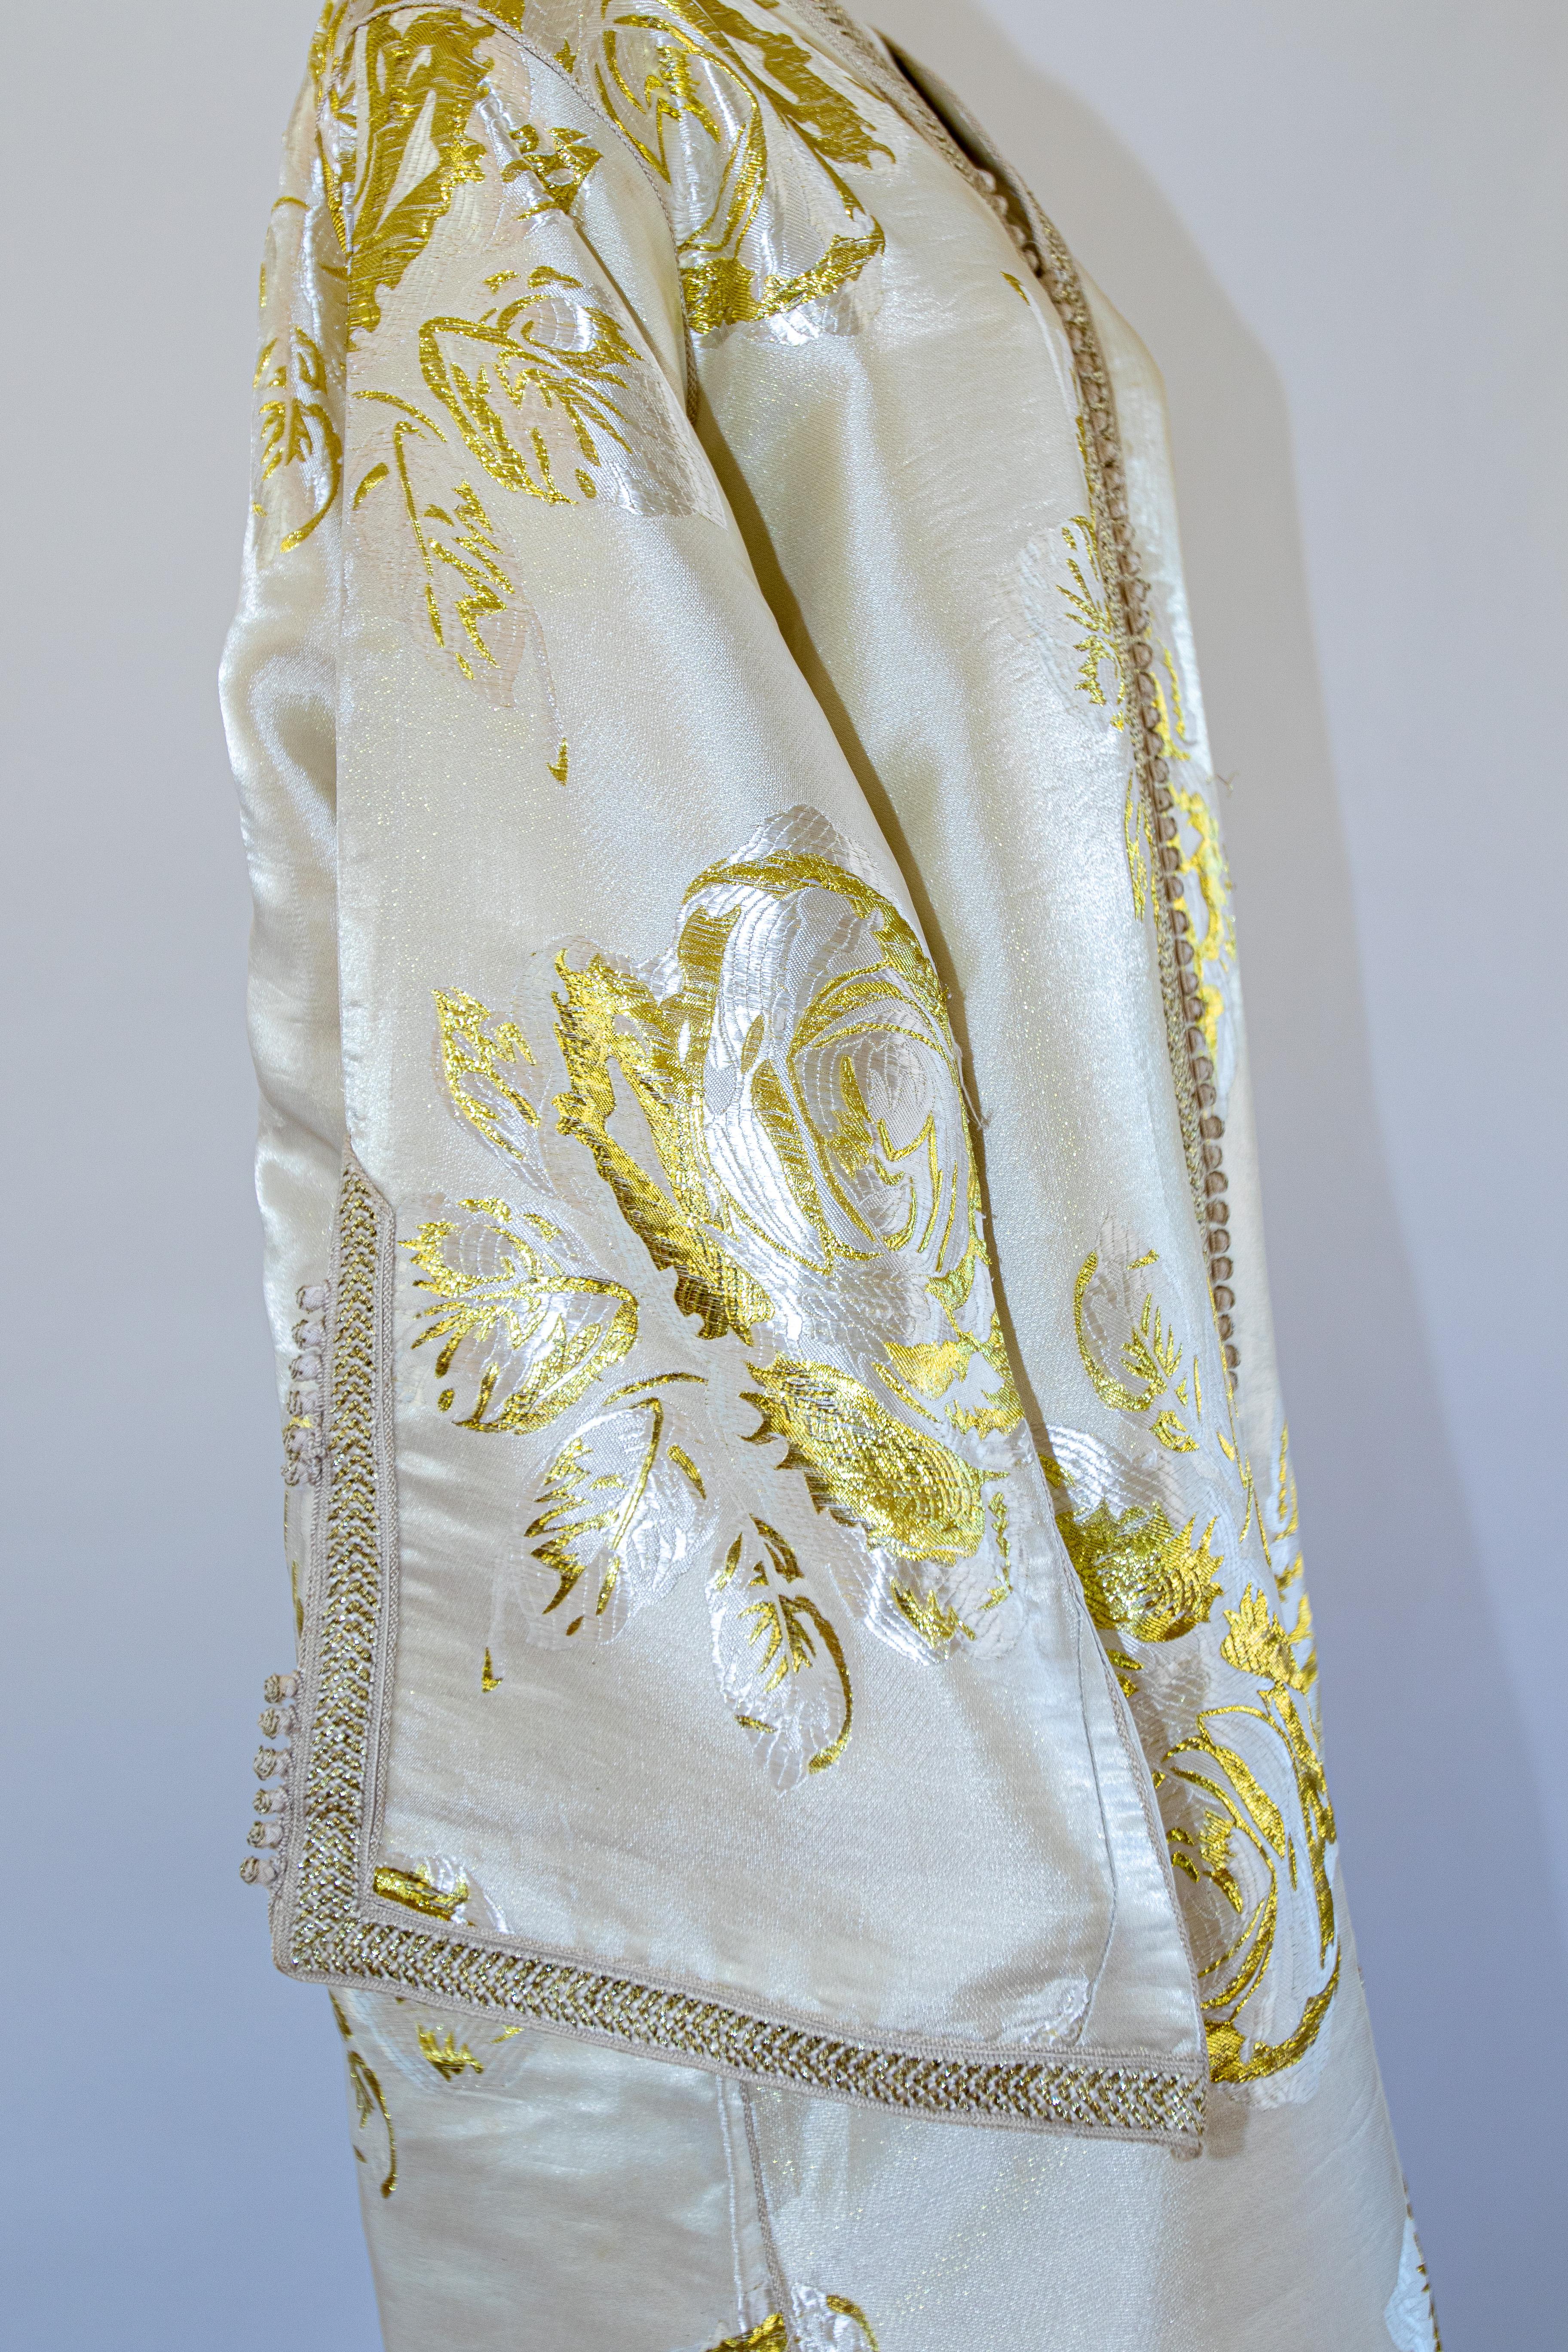 Vintage Moroccan Caftan White and Gold Metallic Floral Brocade For Sale 7